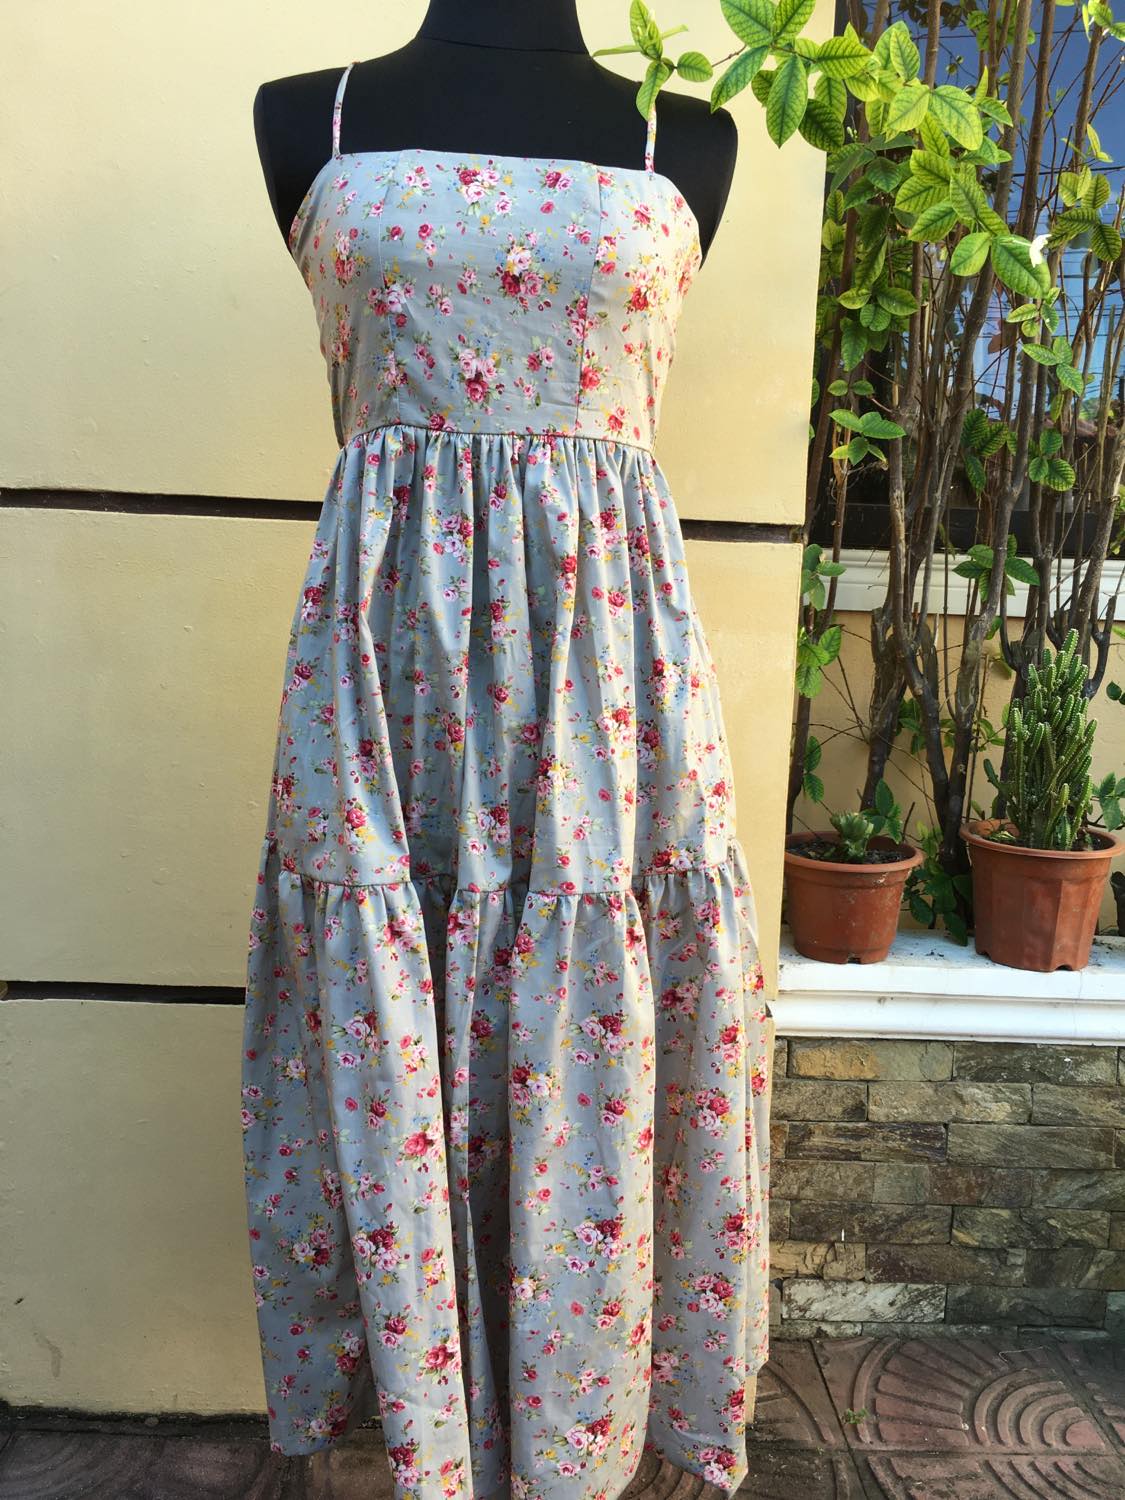 Penelope Dress in Floral Gray